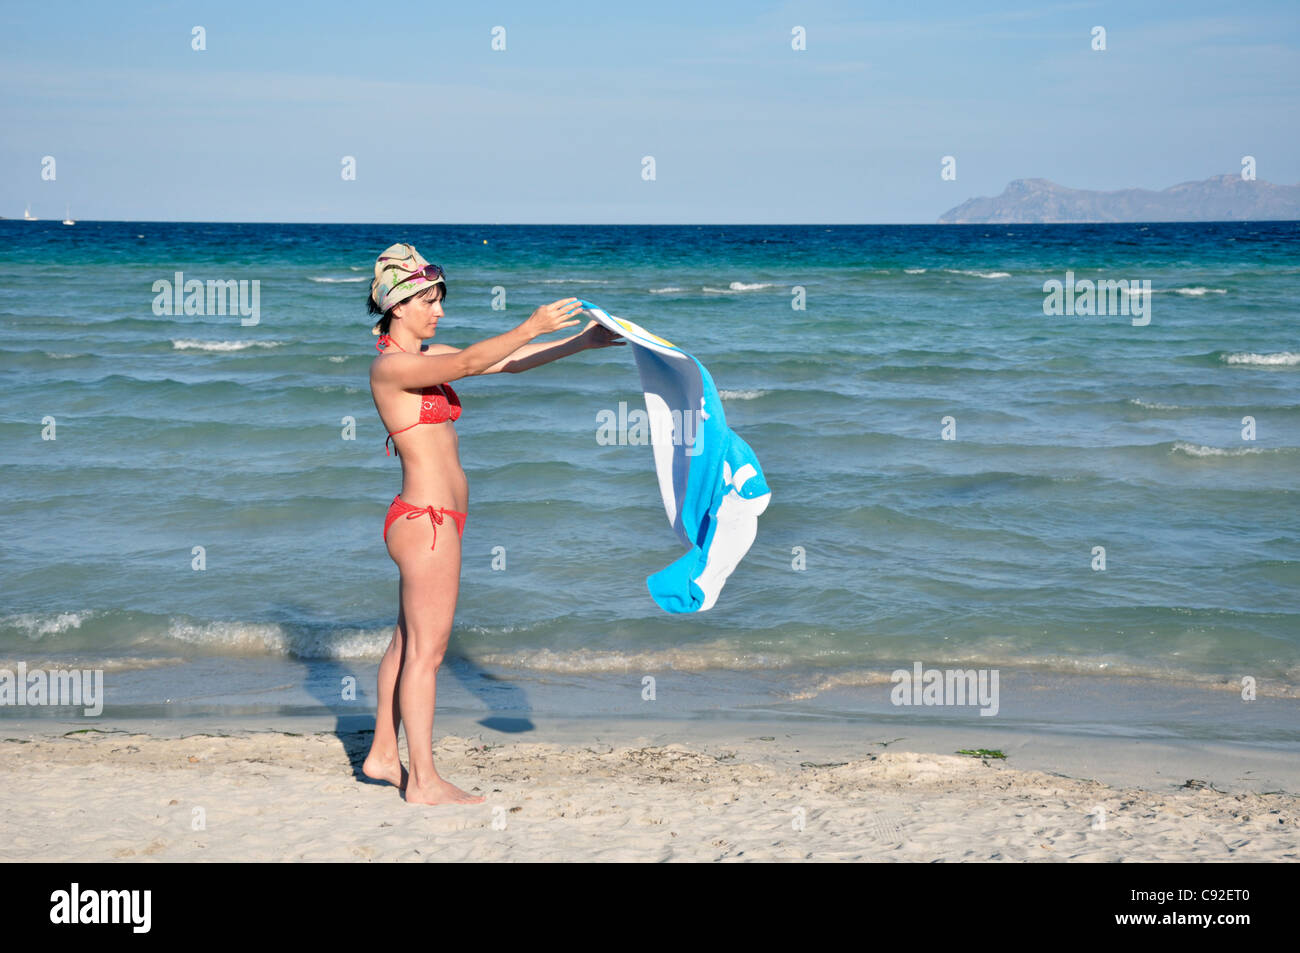 Mid adult woman spreads out towel on beach, Alcudia, Mallorca, Spain, Europe Stock Photo